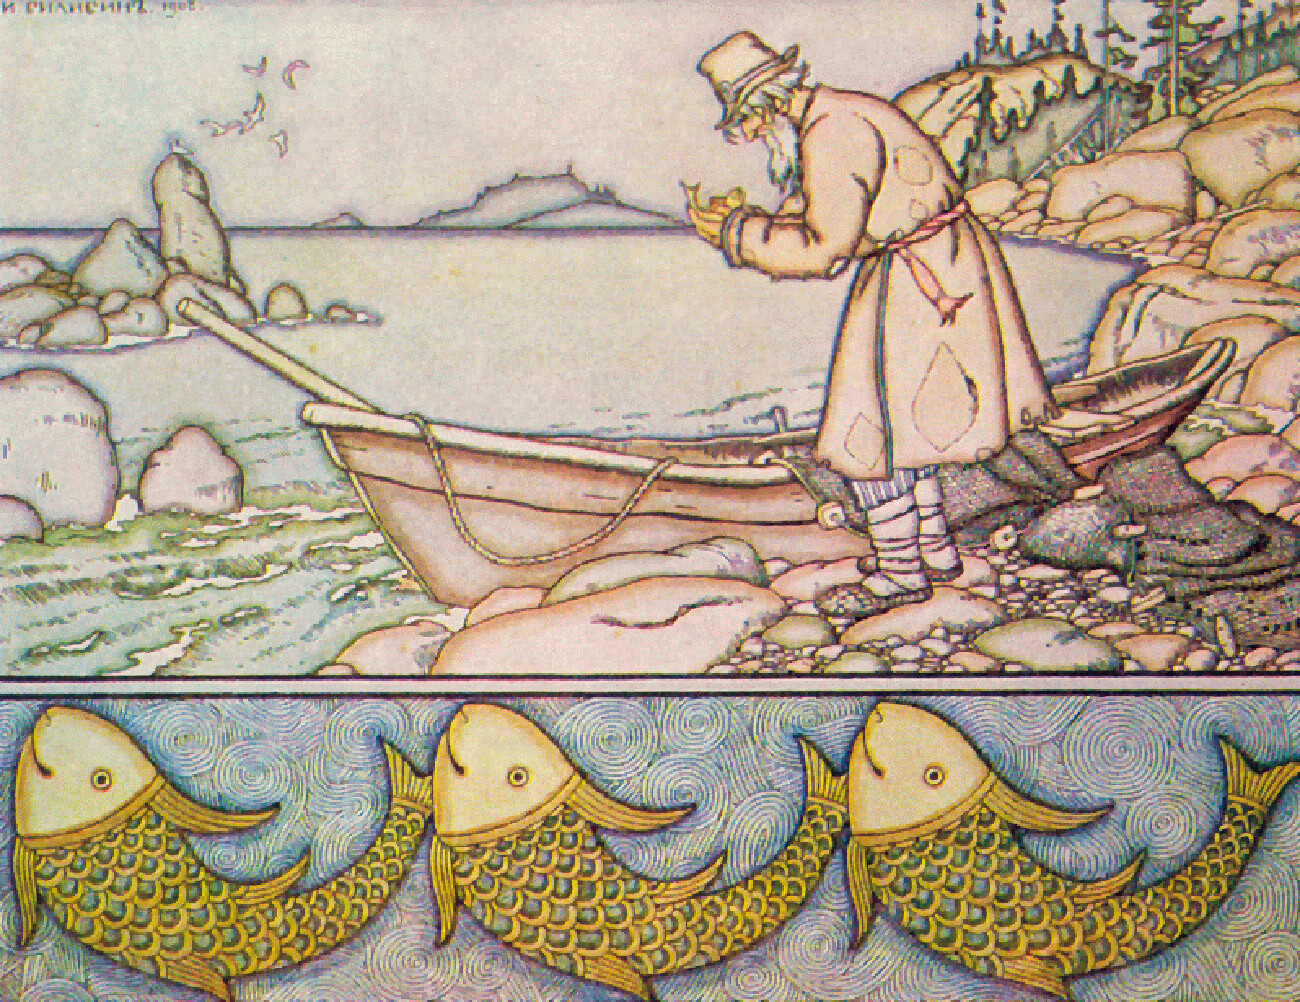 Ivan Bilibin’s illustration for the fairytale ‘The Tale of the Fisherman and the Fish’